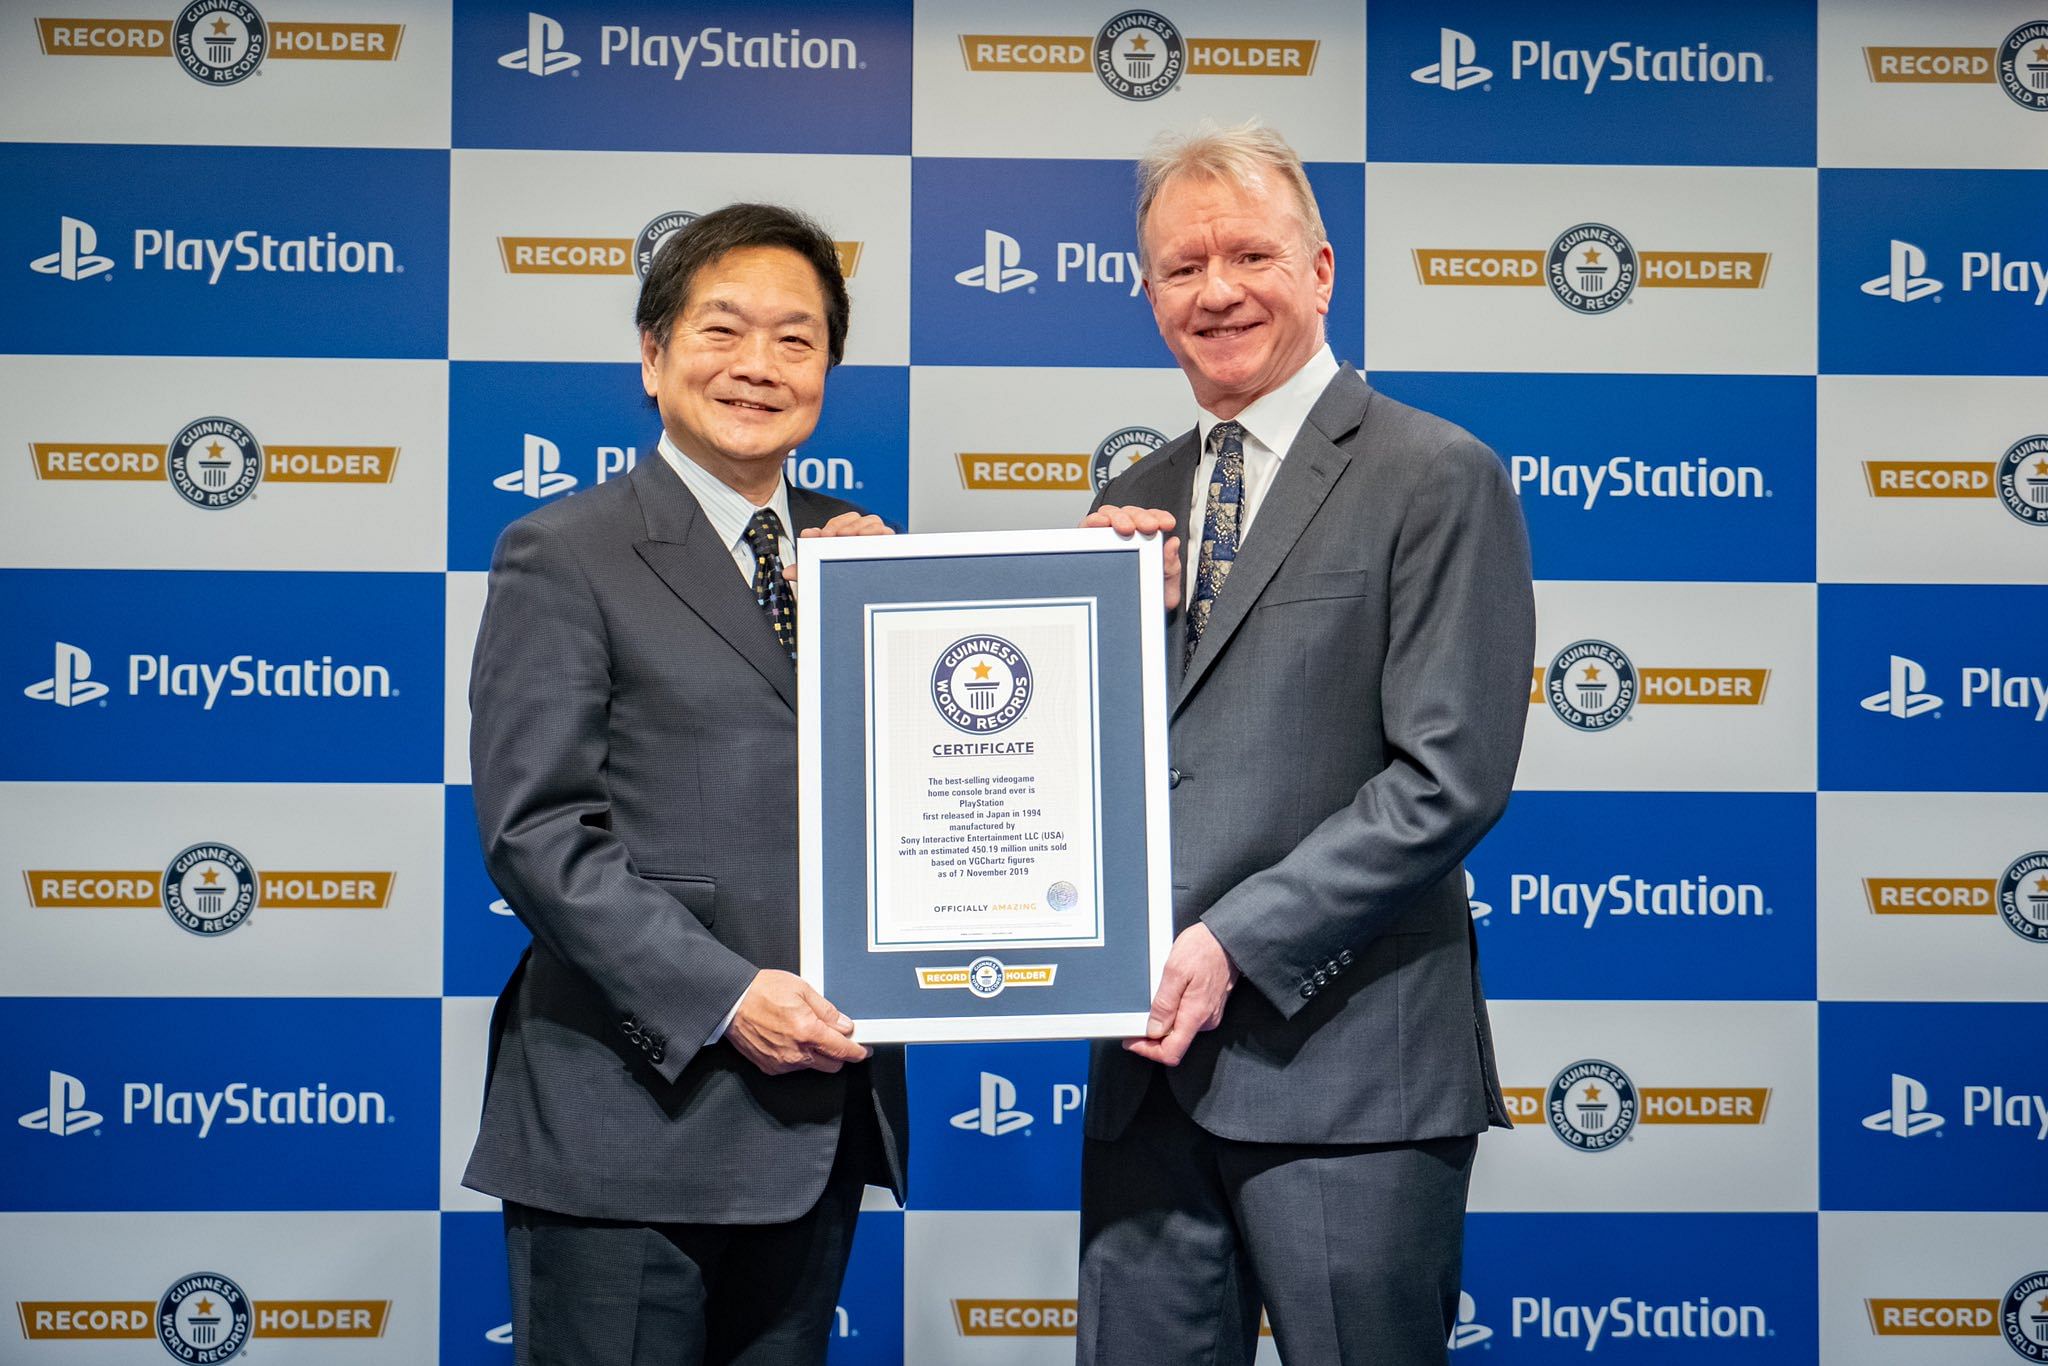 Sony announced the feat with a tweet showing the Guinness World Record certificate. (Photo: Twitter)